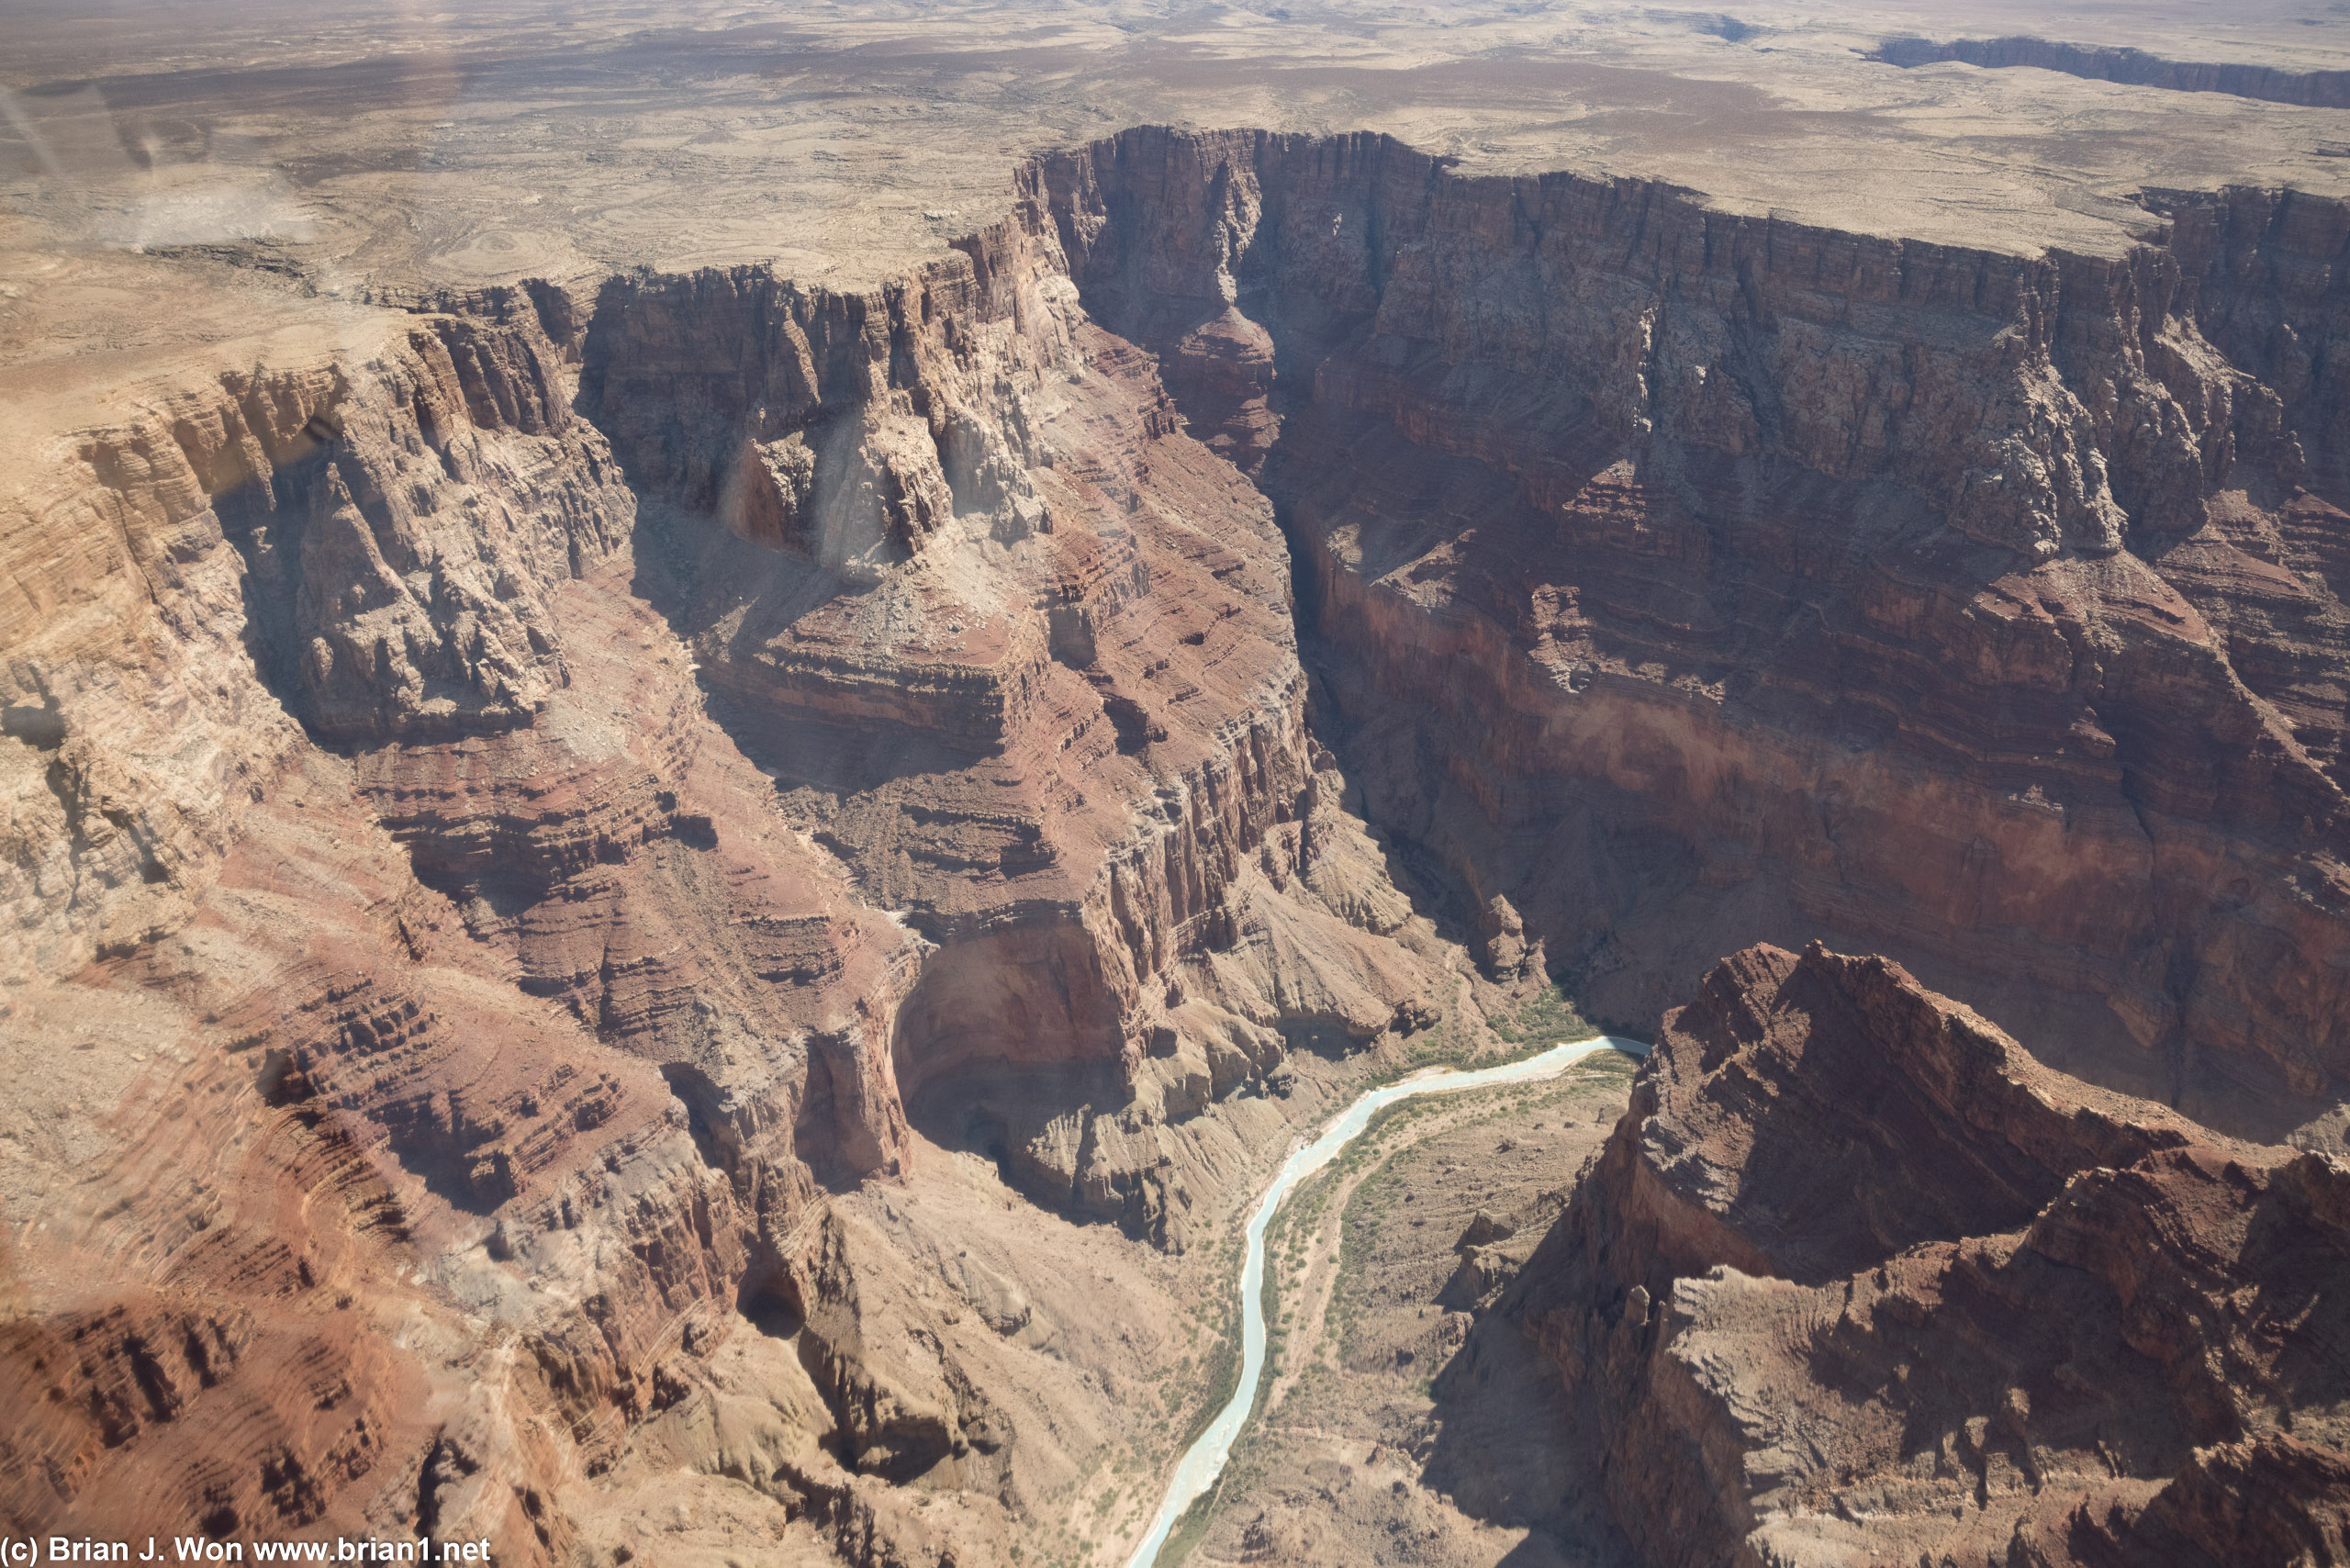 Even the Little Colorado River has carved out some incredibly steep walls.